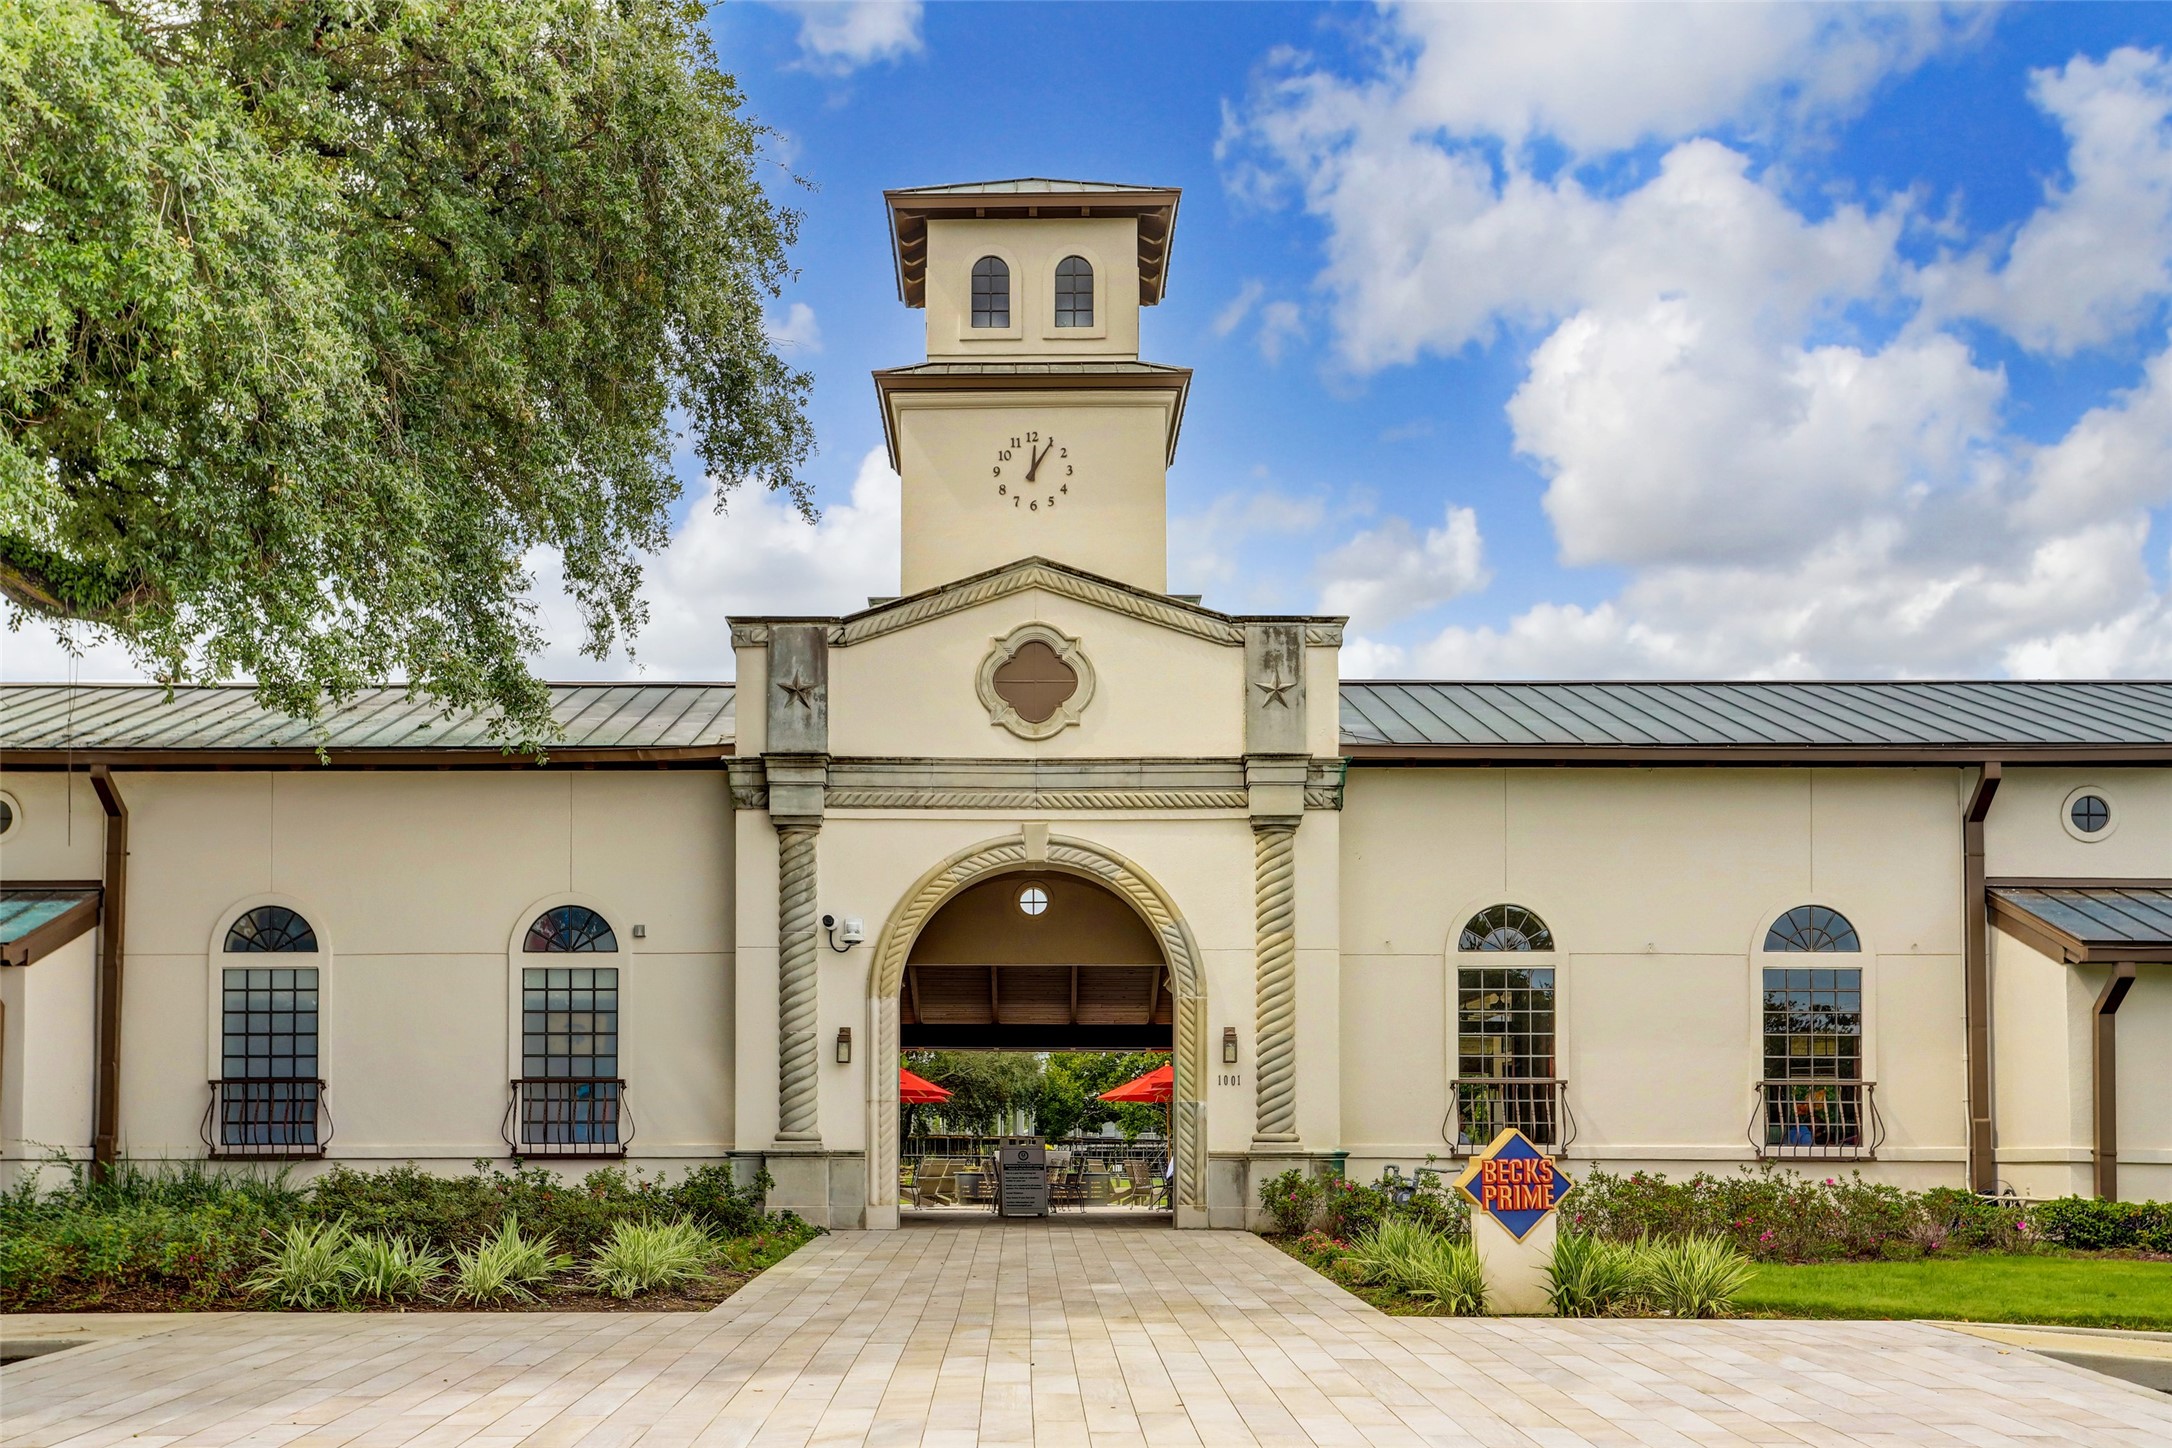 White Oak Station: Located in one of Houston's most desirable neighborhoods. Easy access to all major highways, the community is only minutes from Memorial Park, The Heights, Galleria, Downtown & Washington Corridor & many recreational parks at walking distance.